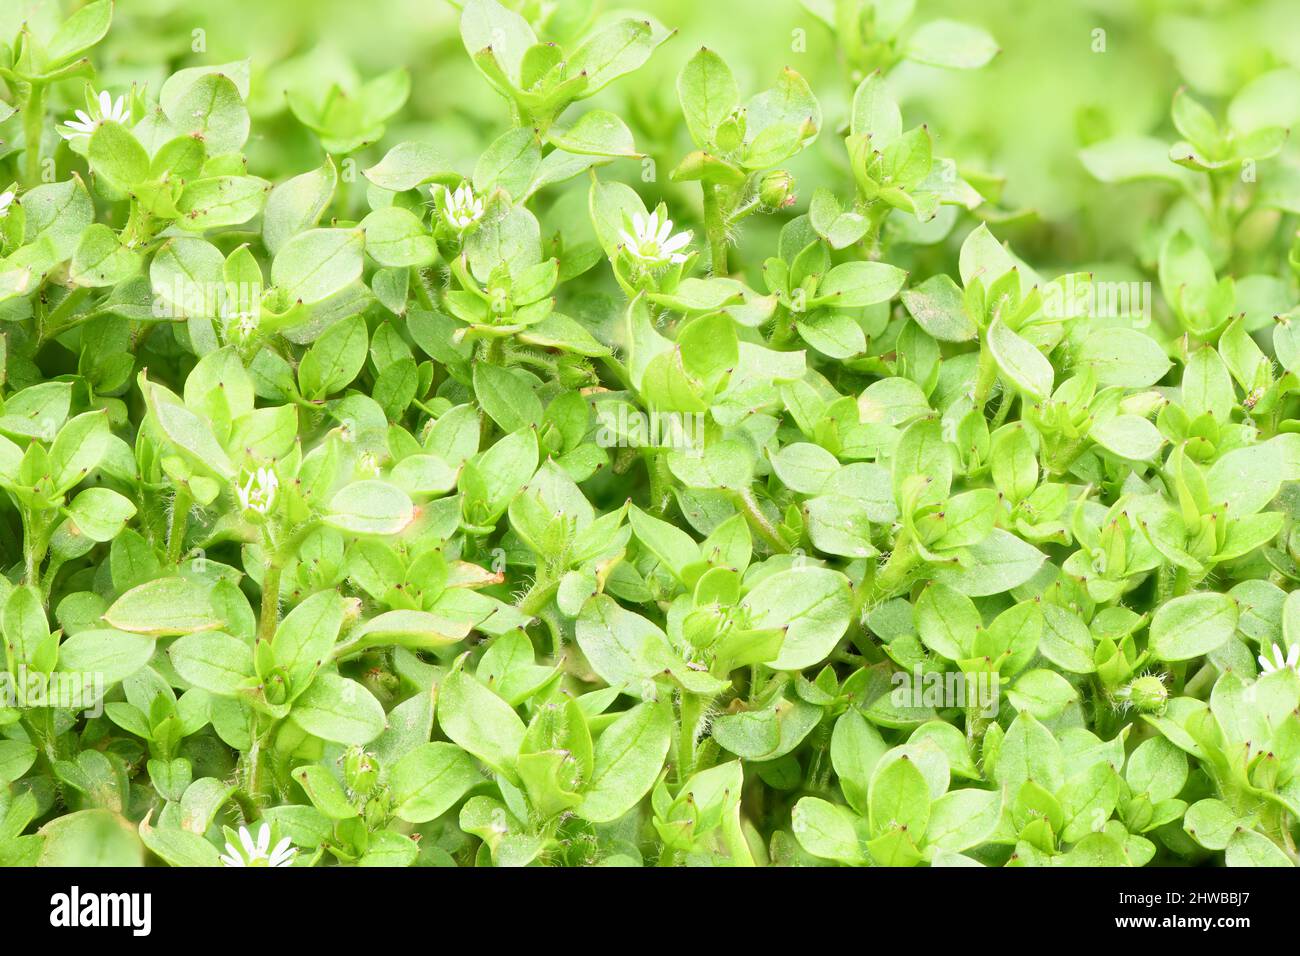 Chickweed ,Stellaria media in the garden. The plants are annual and with weak slender stems, they reach a length up to 40 cm. High resolution photo. F Stock Photo